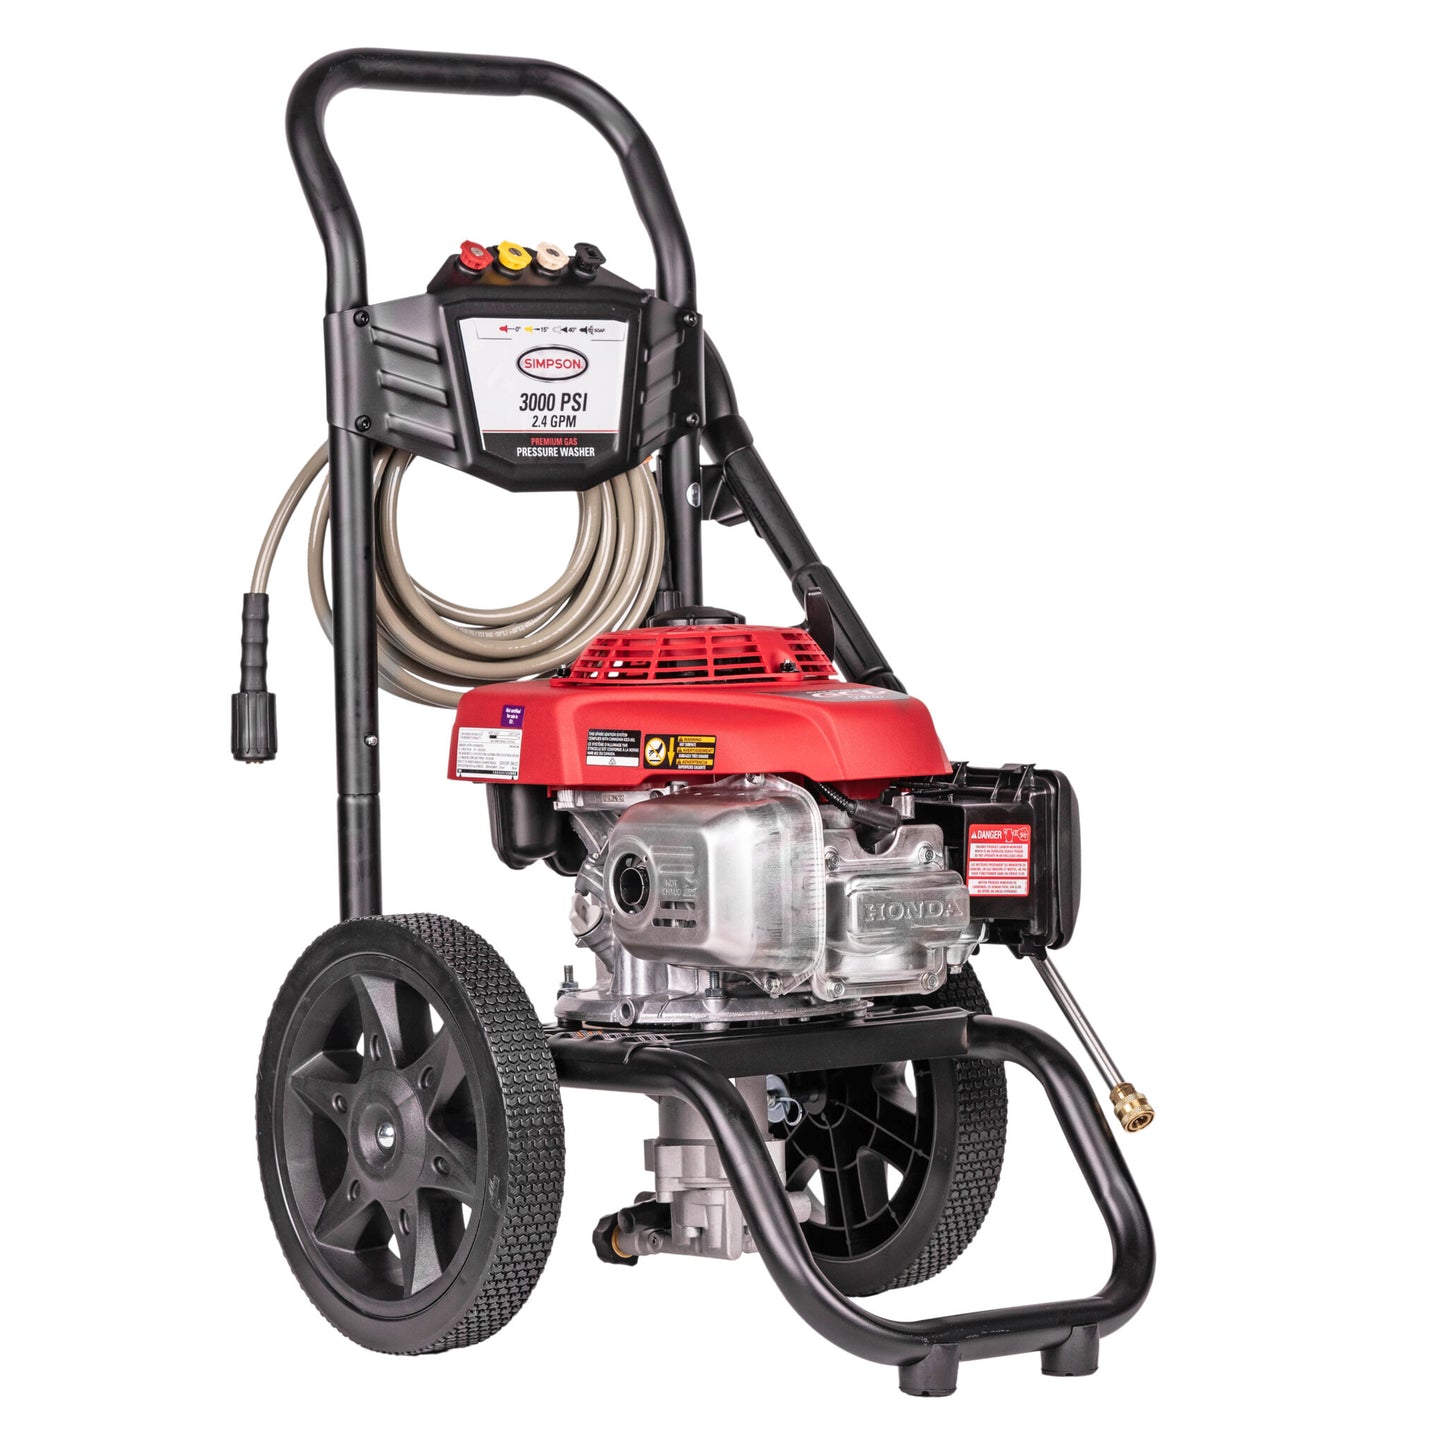 Simpson Mega Shop 3000 PSI at 2.4 GPM Honda GCV160 Cold Water Premium Residential Gas Pressure Washer Factory Serviced